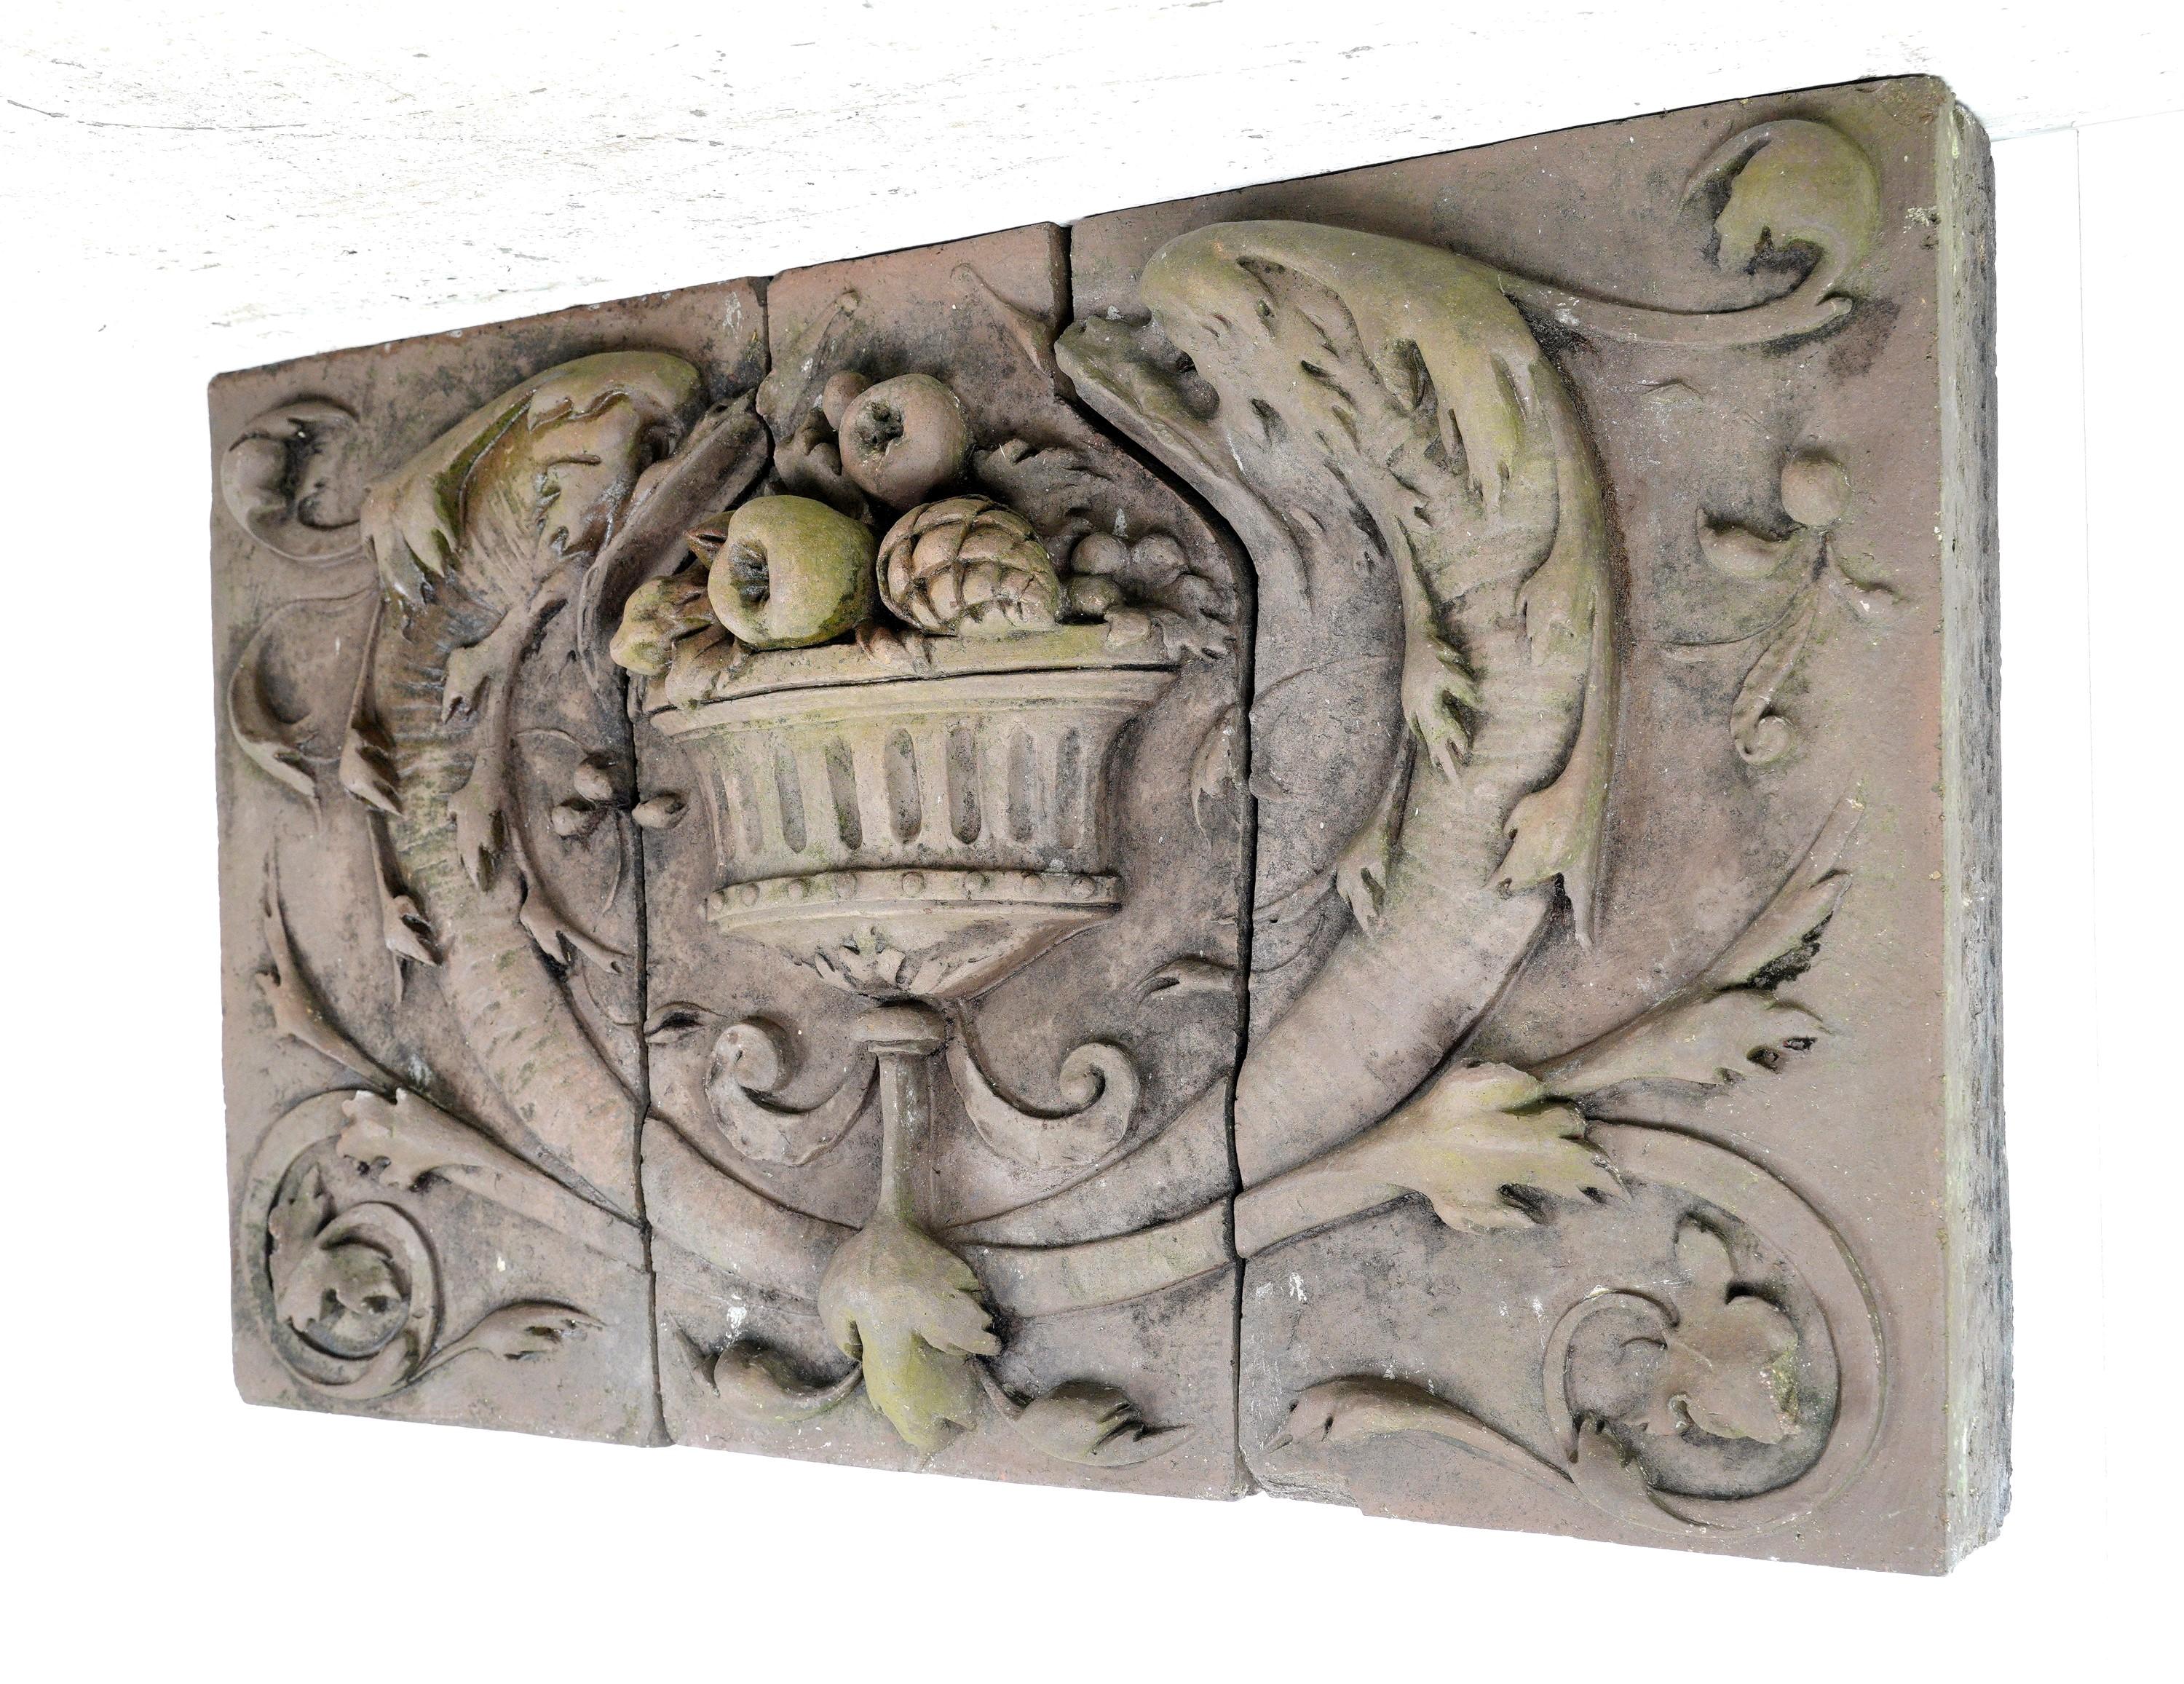 This ornate terra cotta stone frieze features an ornate high relief of swirled floral foliate and fruit details. This is in good condition, with some surface wear on the corners. The frieze is made up of three pieces. Please note, this item is